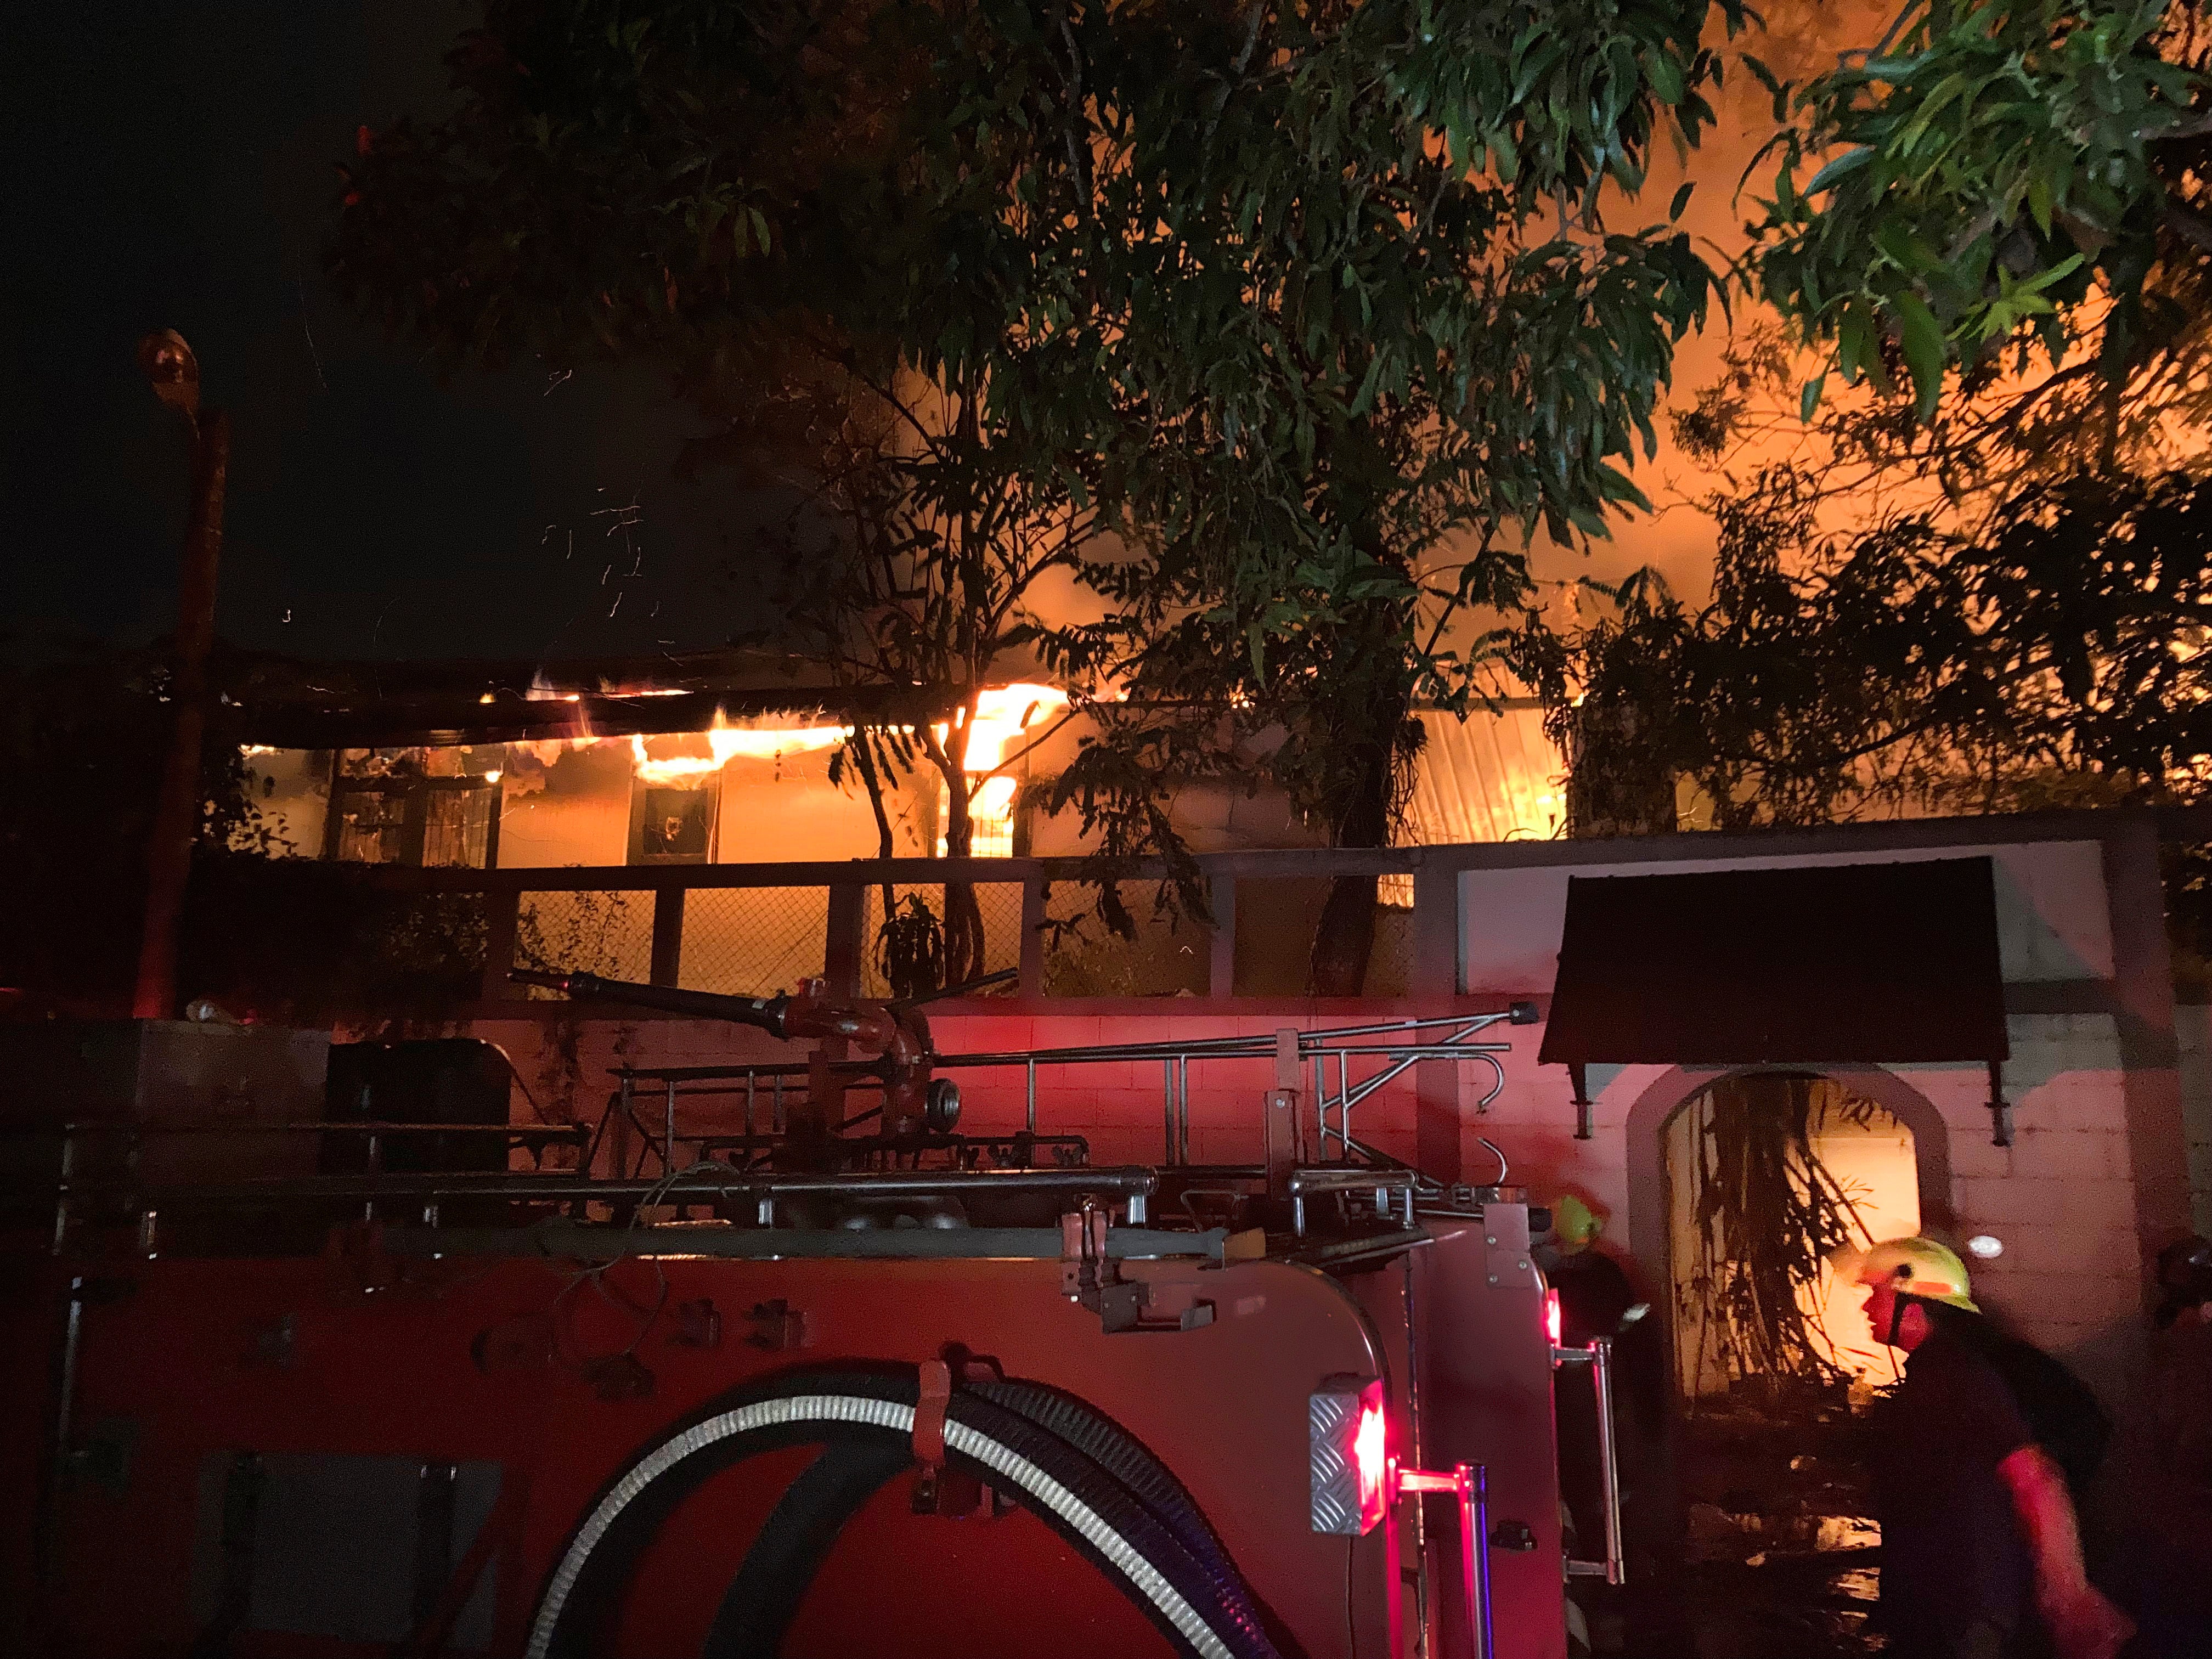 Firefighters try to douse a blaze at Ranil Wickremesinghe’s private residence, in Colombo